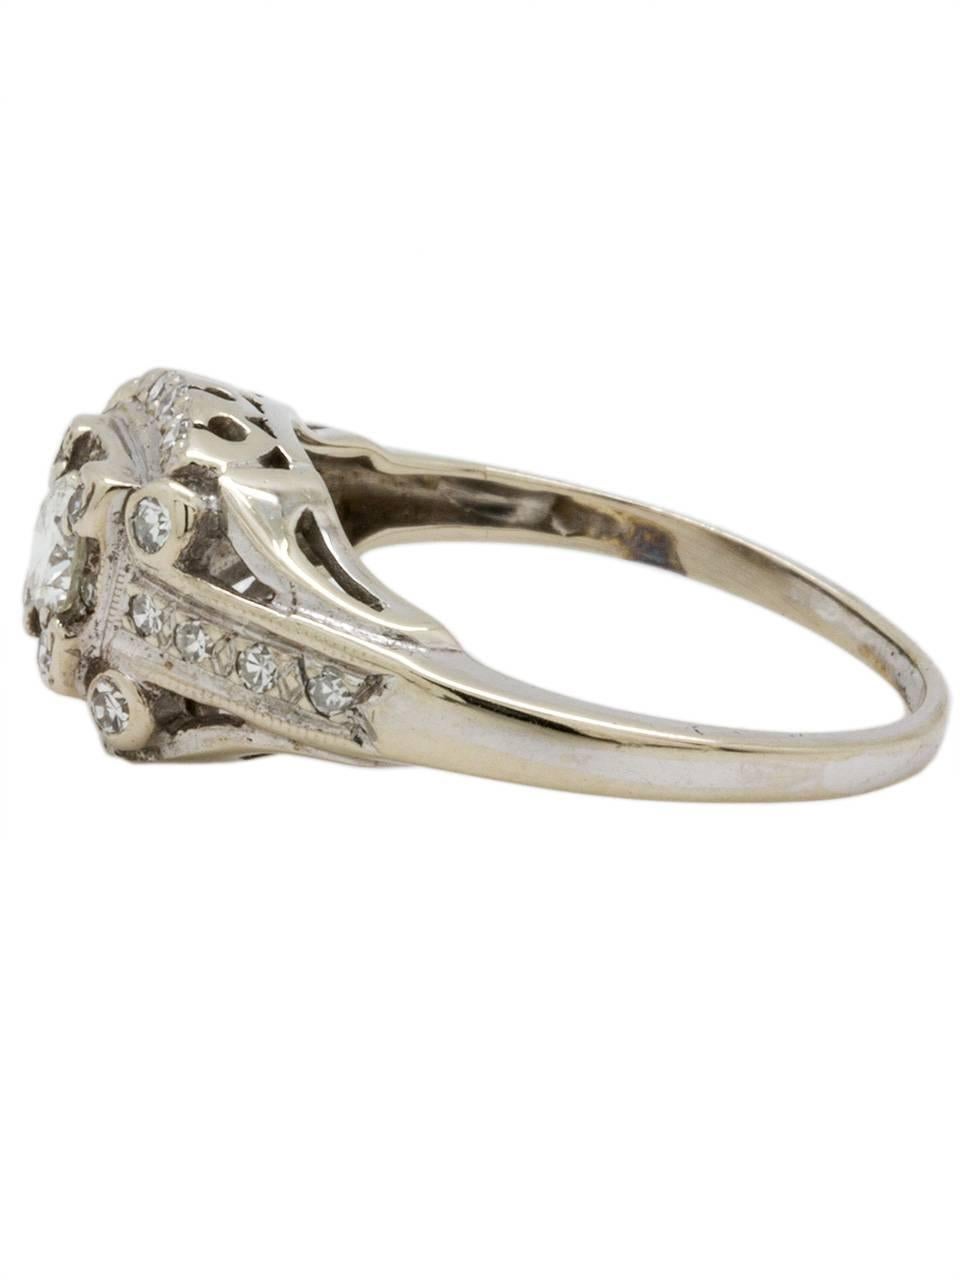 Gorgeous 1940s 18k white gold engagement ring set .30ct round brilliant cut center diamond with I color (near colorless) and exceptional VS1 clarity.  Lovely tapered design setting, with 26 bead and bezel set single-cut side diamonds, with total